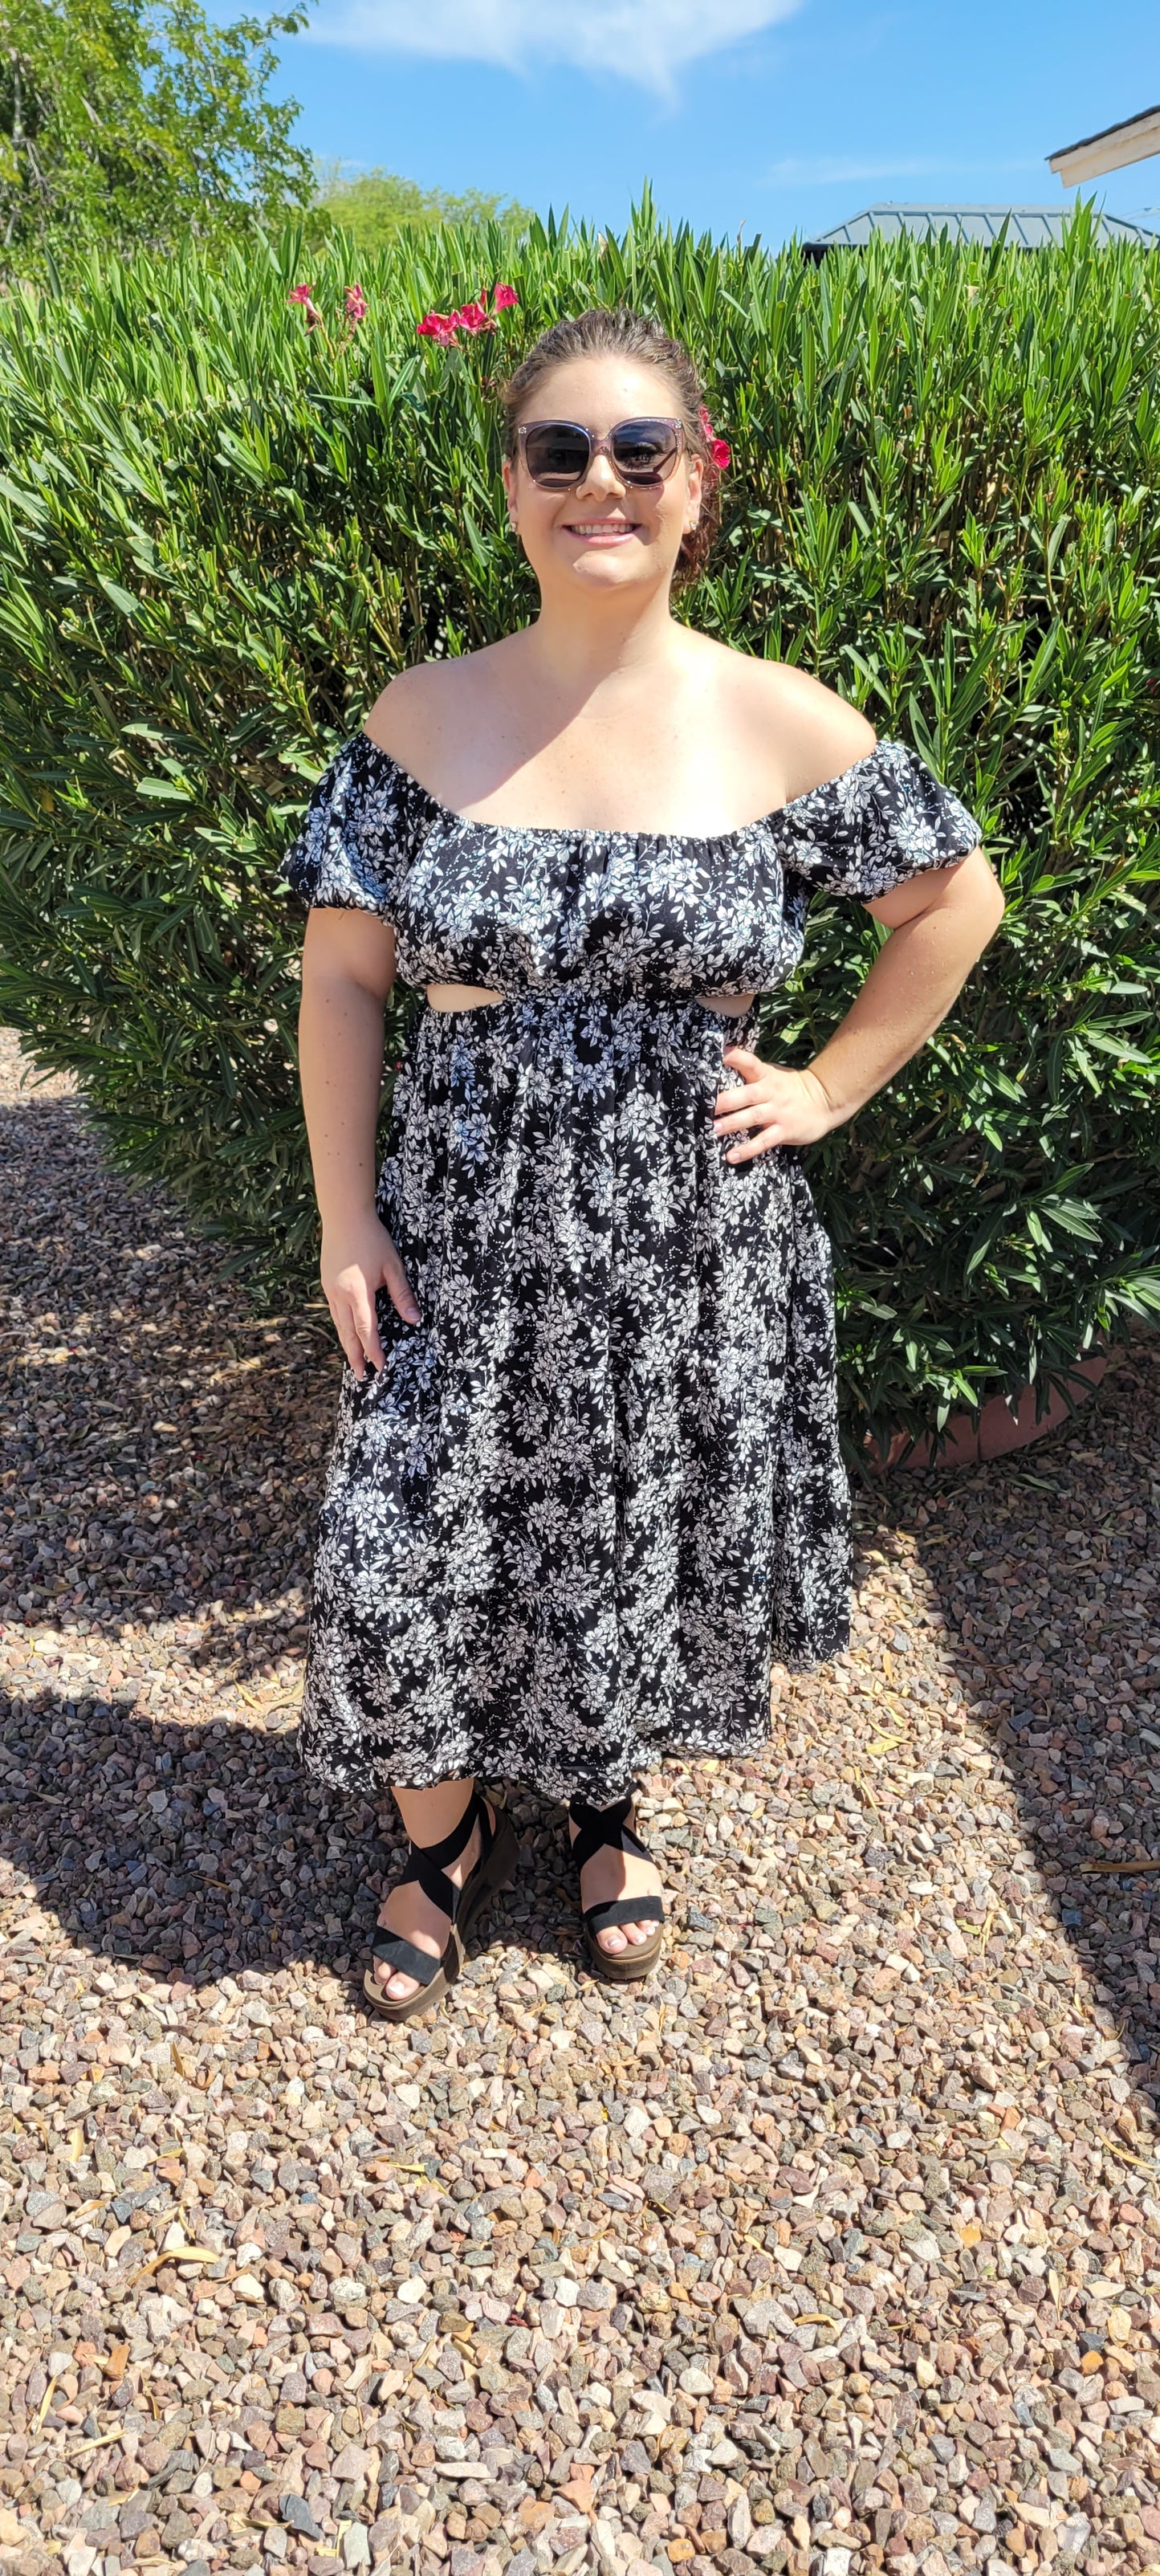 V“Vacay Mode” is a black and white floral dress. This dress features peek-a-boo cutouts, open back with bow tie, tiered hemline, midi length, elastic neckline, puff sleeves, and waistline. This is a woven, non-stretch fabric, unlined, non-sheer, and lightweight. You can wear this dress on or off your shoulders. Sizes small, medium and large